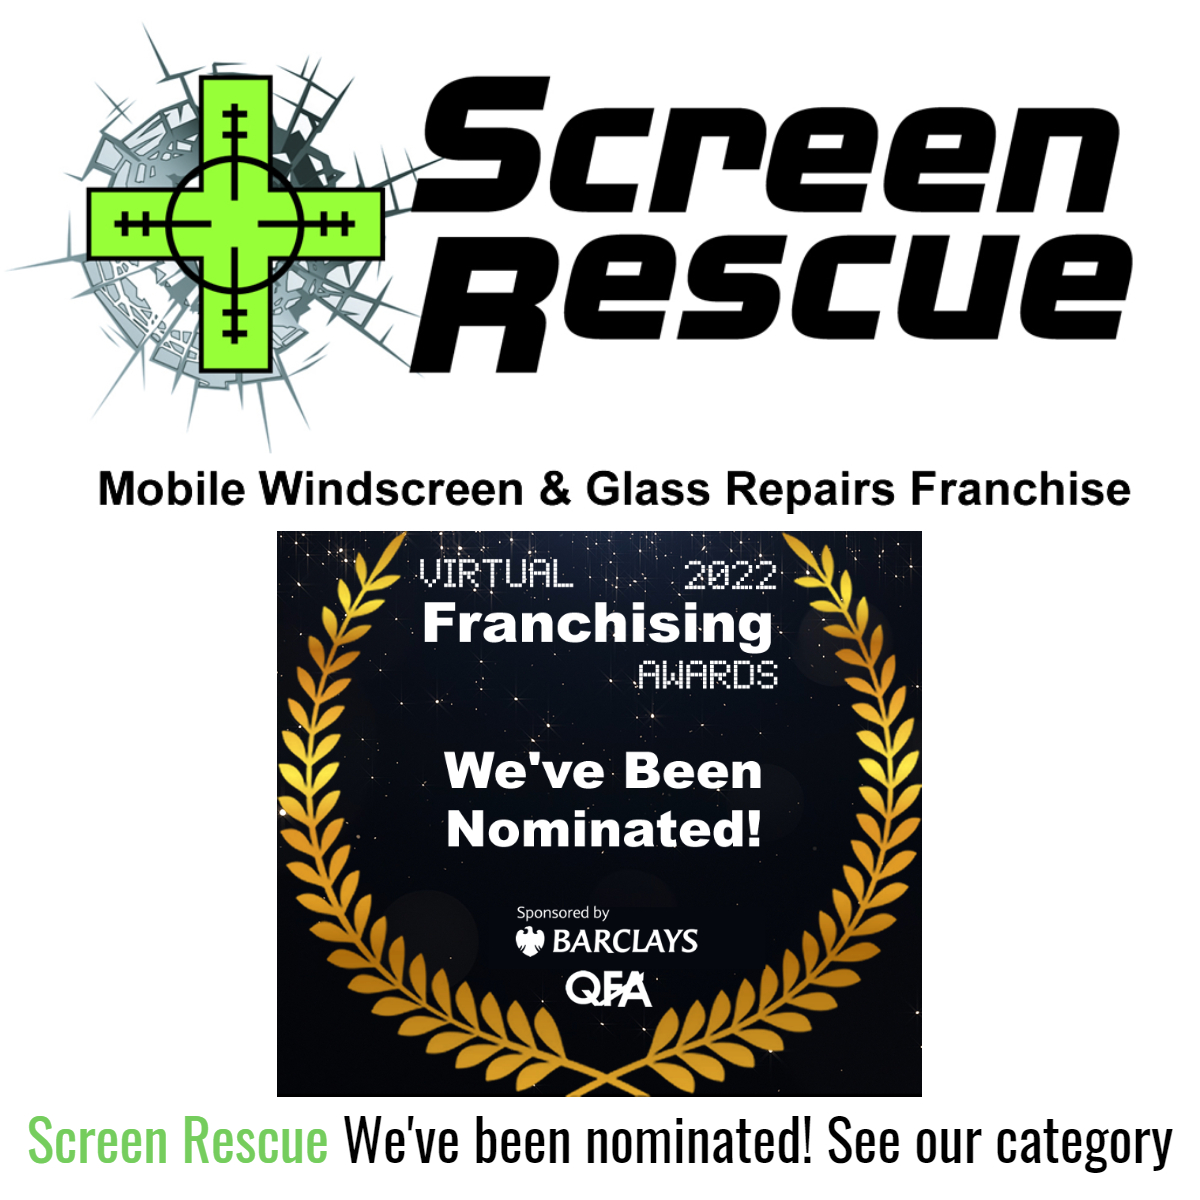 Screen Rescue is nominated in the QFA Virtual Franchise Awards 2022!